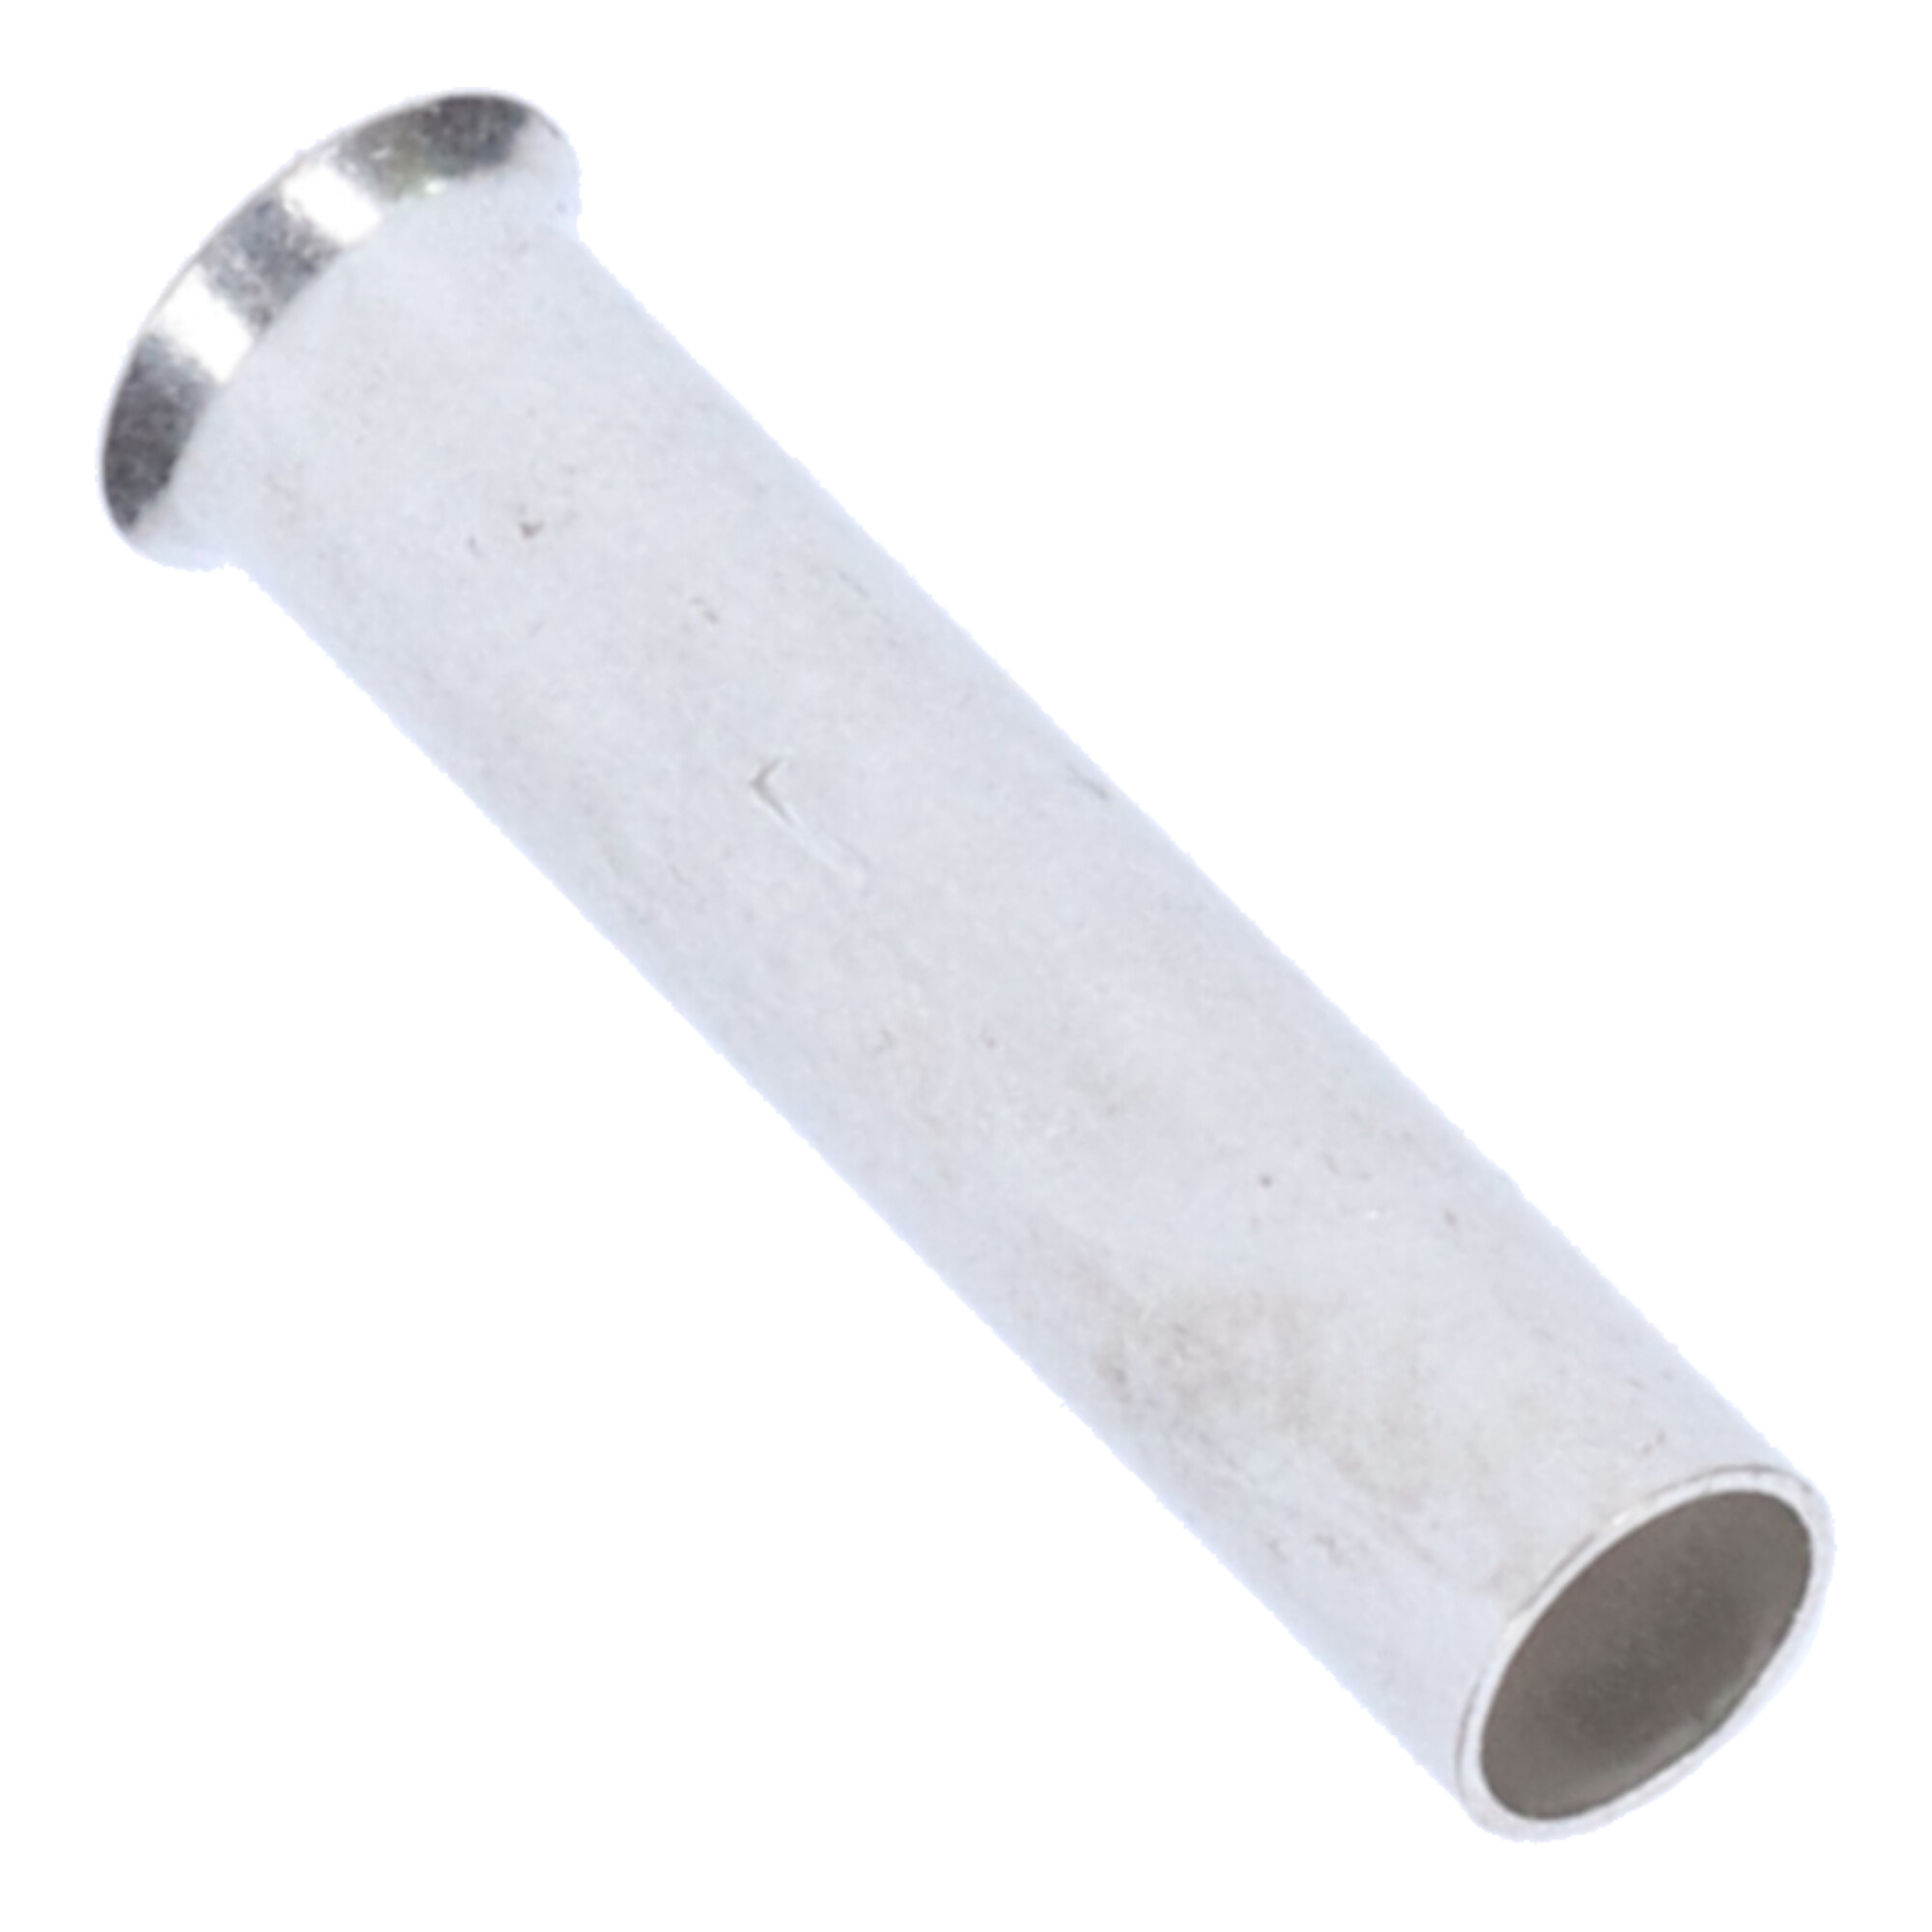 15-B01520 Uninsulated wire end sleeve